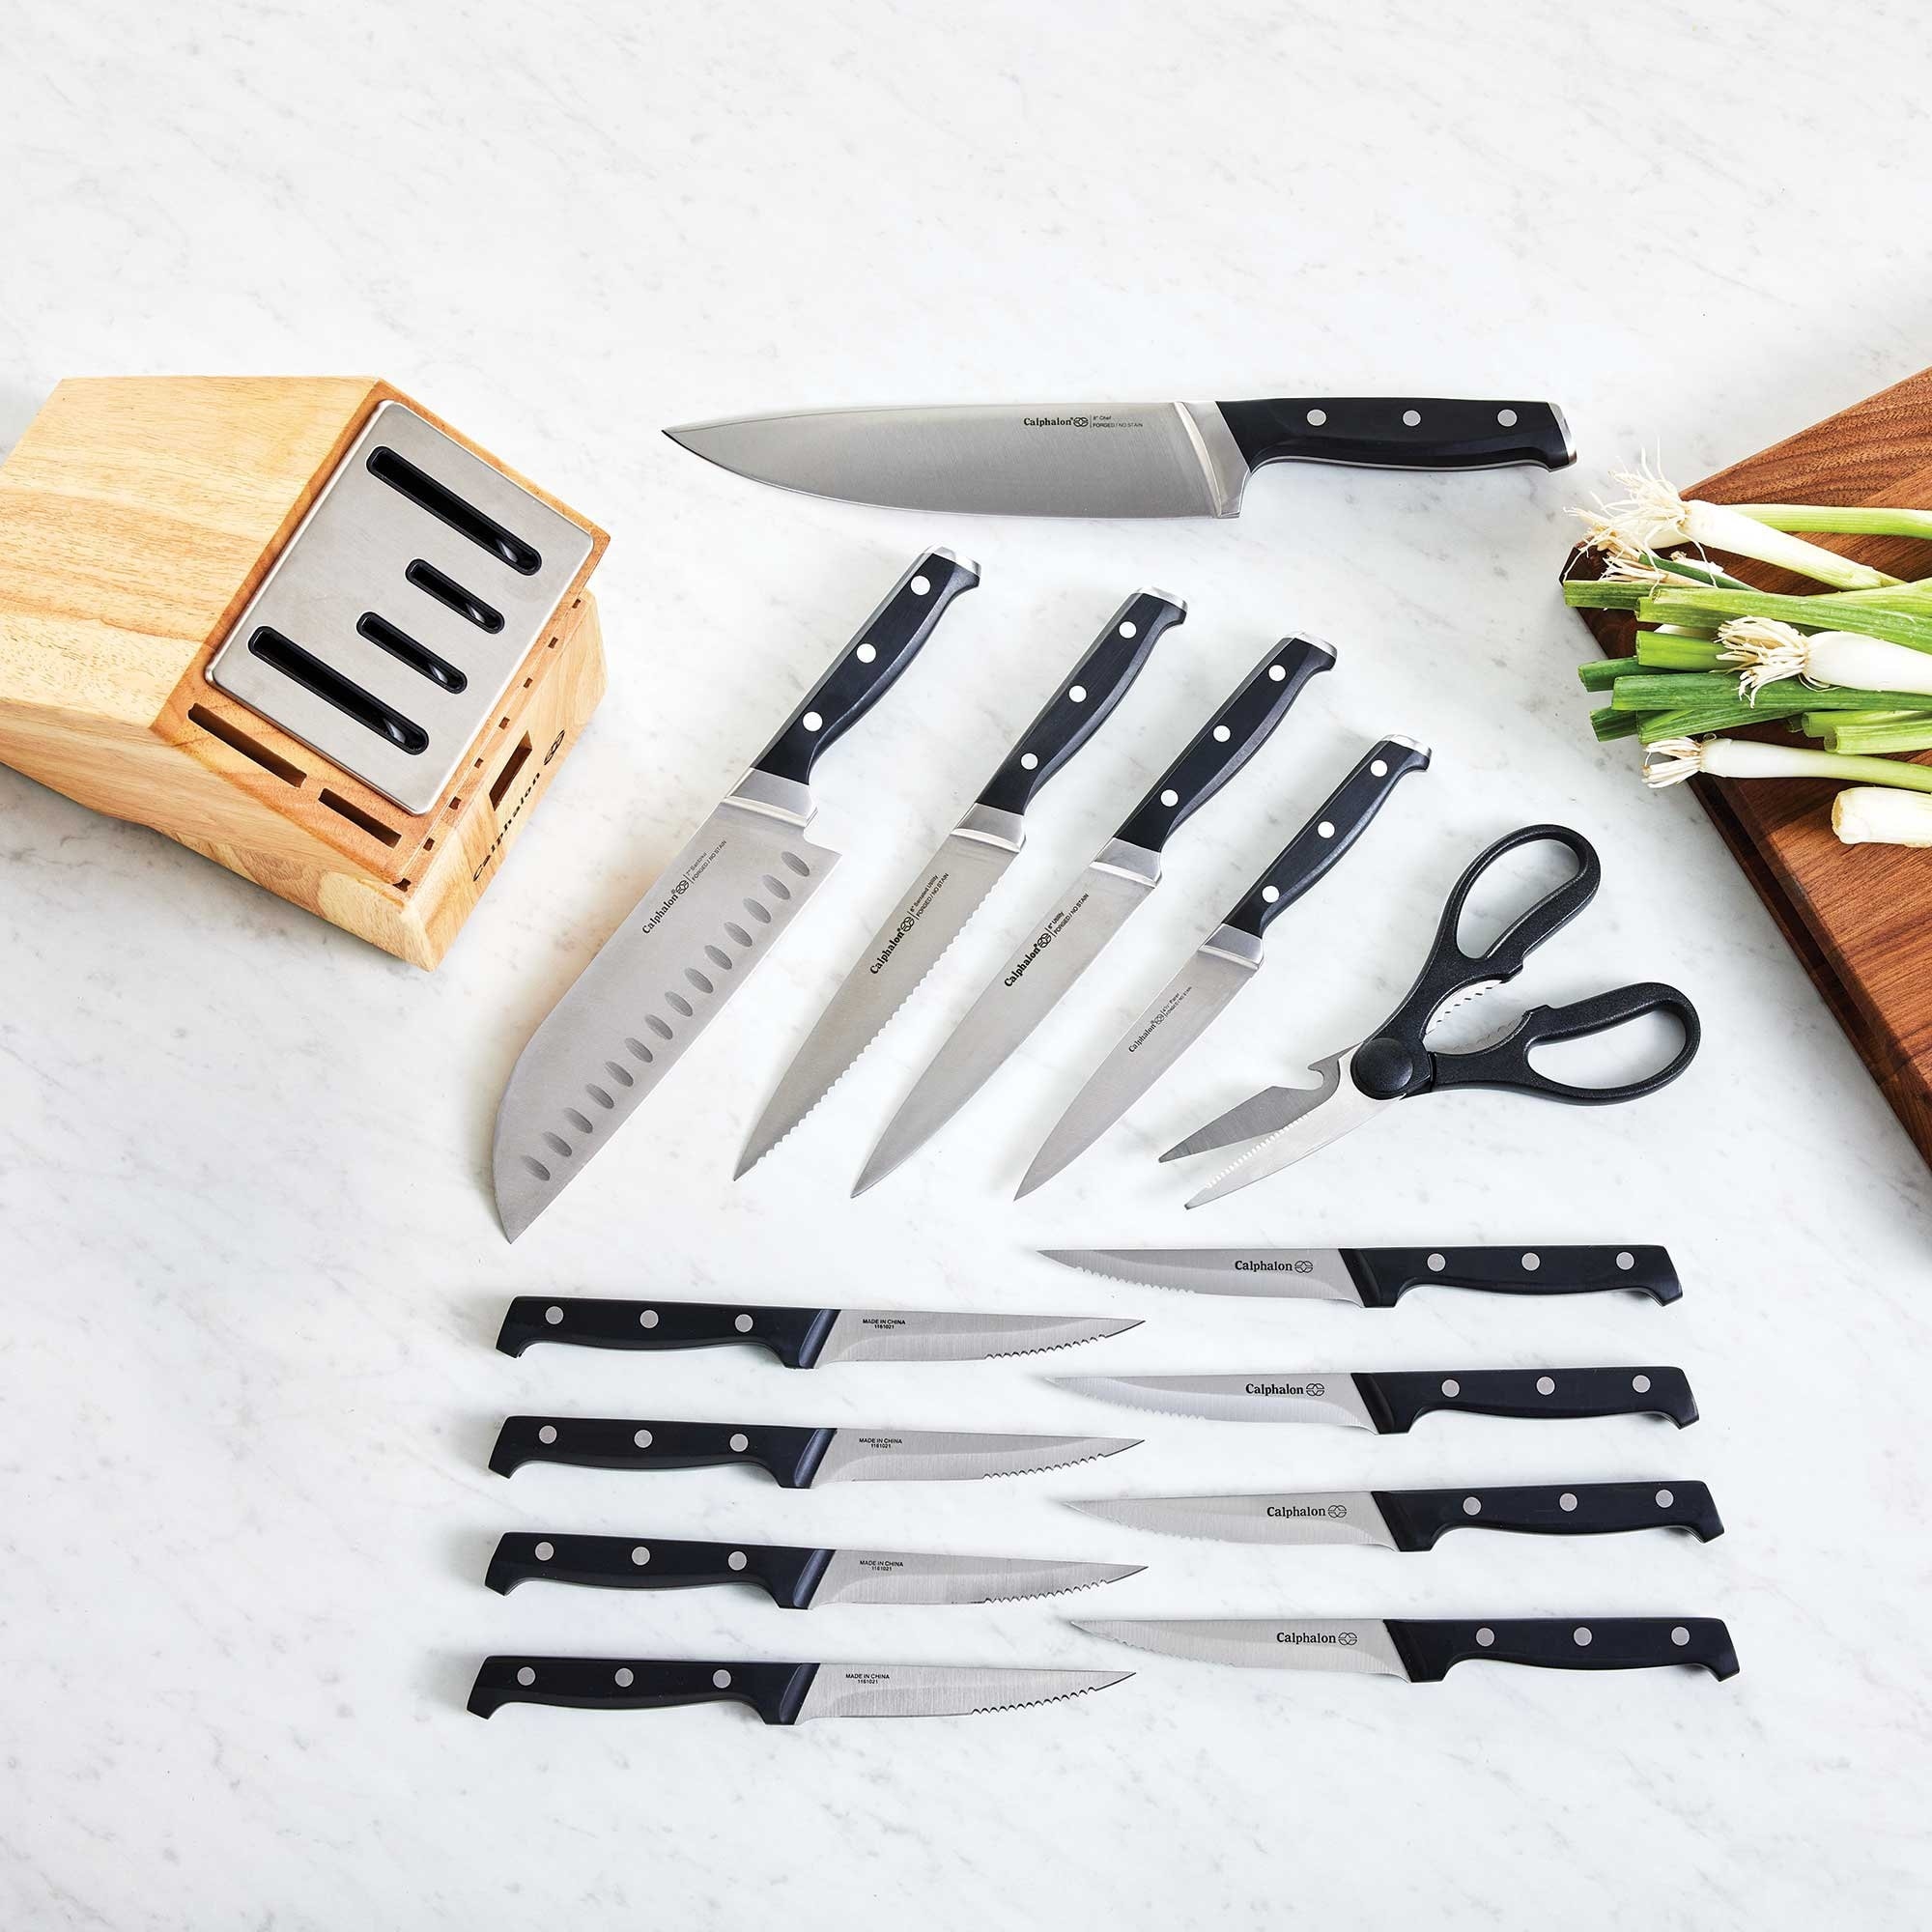  Calphalon Kitchen Knife Set with Self-Sharpening Block,  15-Piece Classic High Carbon Knives: Home & Kitchen